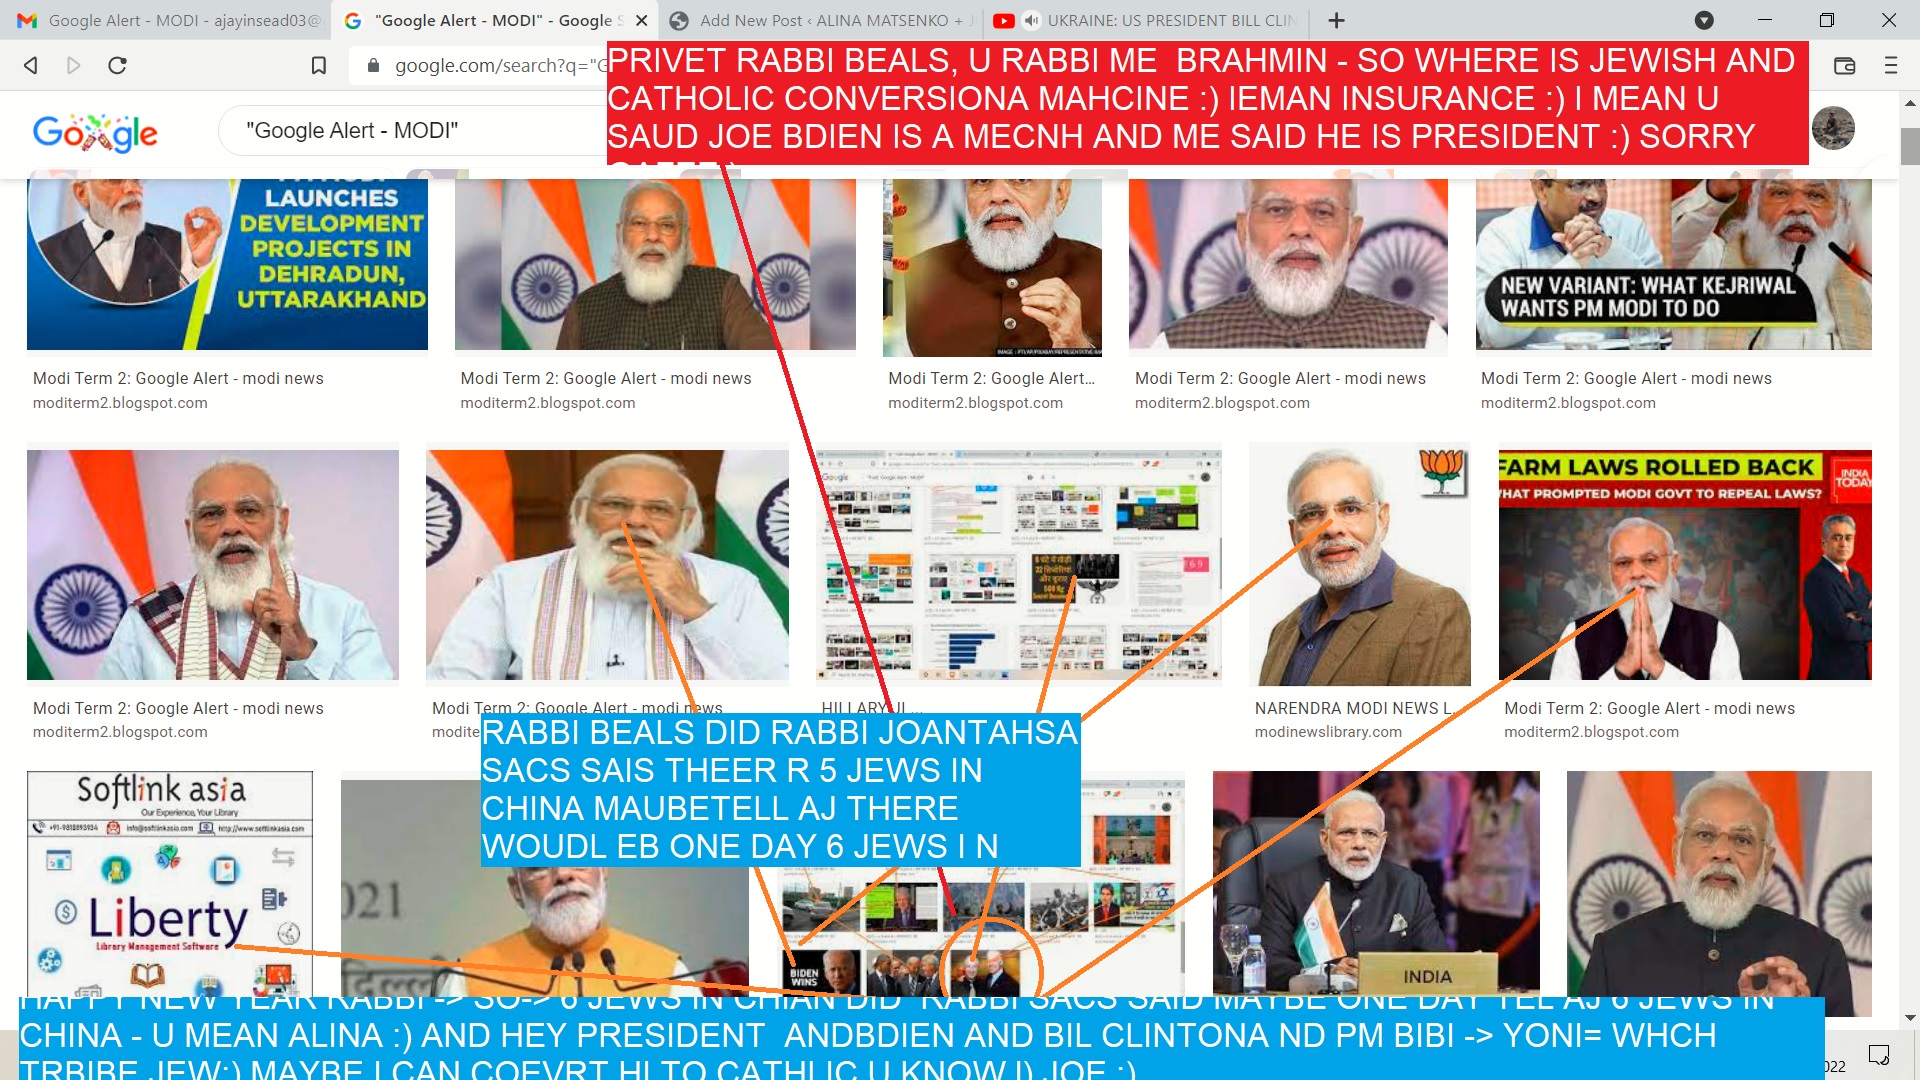 GOOGLE ALERT MODI HAPPY NEAY TYERA RAHUL GANDHI SIR AND MODI JI AND MRSSONIA GANDHI AD MSULIMS ALSO NOTJUST TO BRAHMIAND JEWS ONLY BUT END OWSIS AND KAHSN HATEED -- ..-----